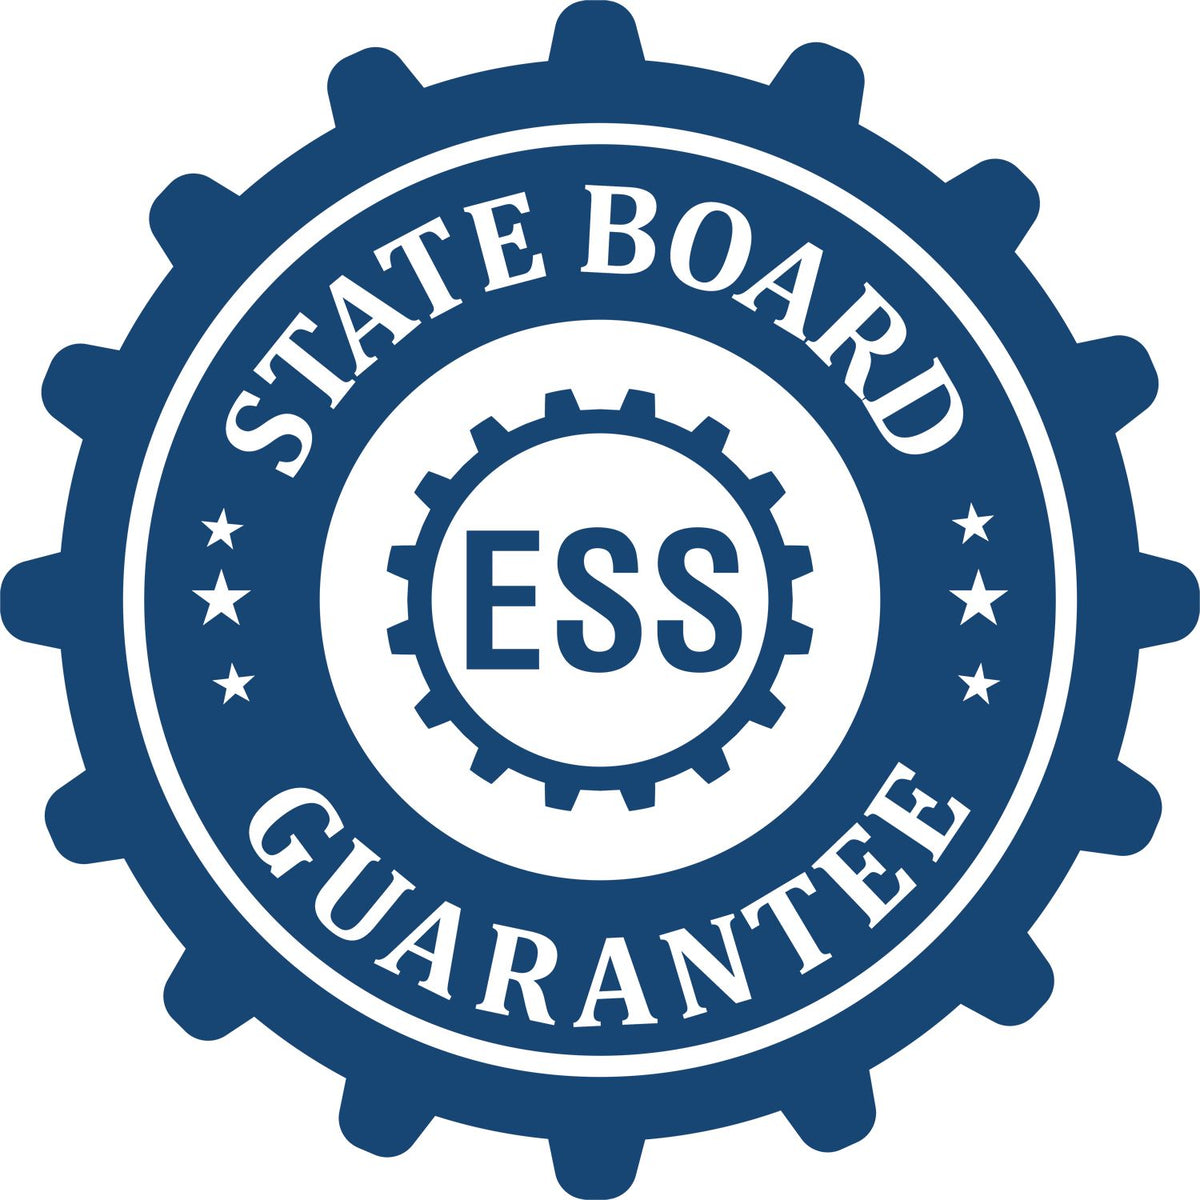 An emblem in a gear shape illustrating a state board guarantee for the Hybrid Nevada Engineer Seal